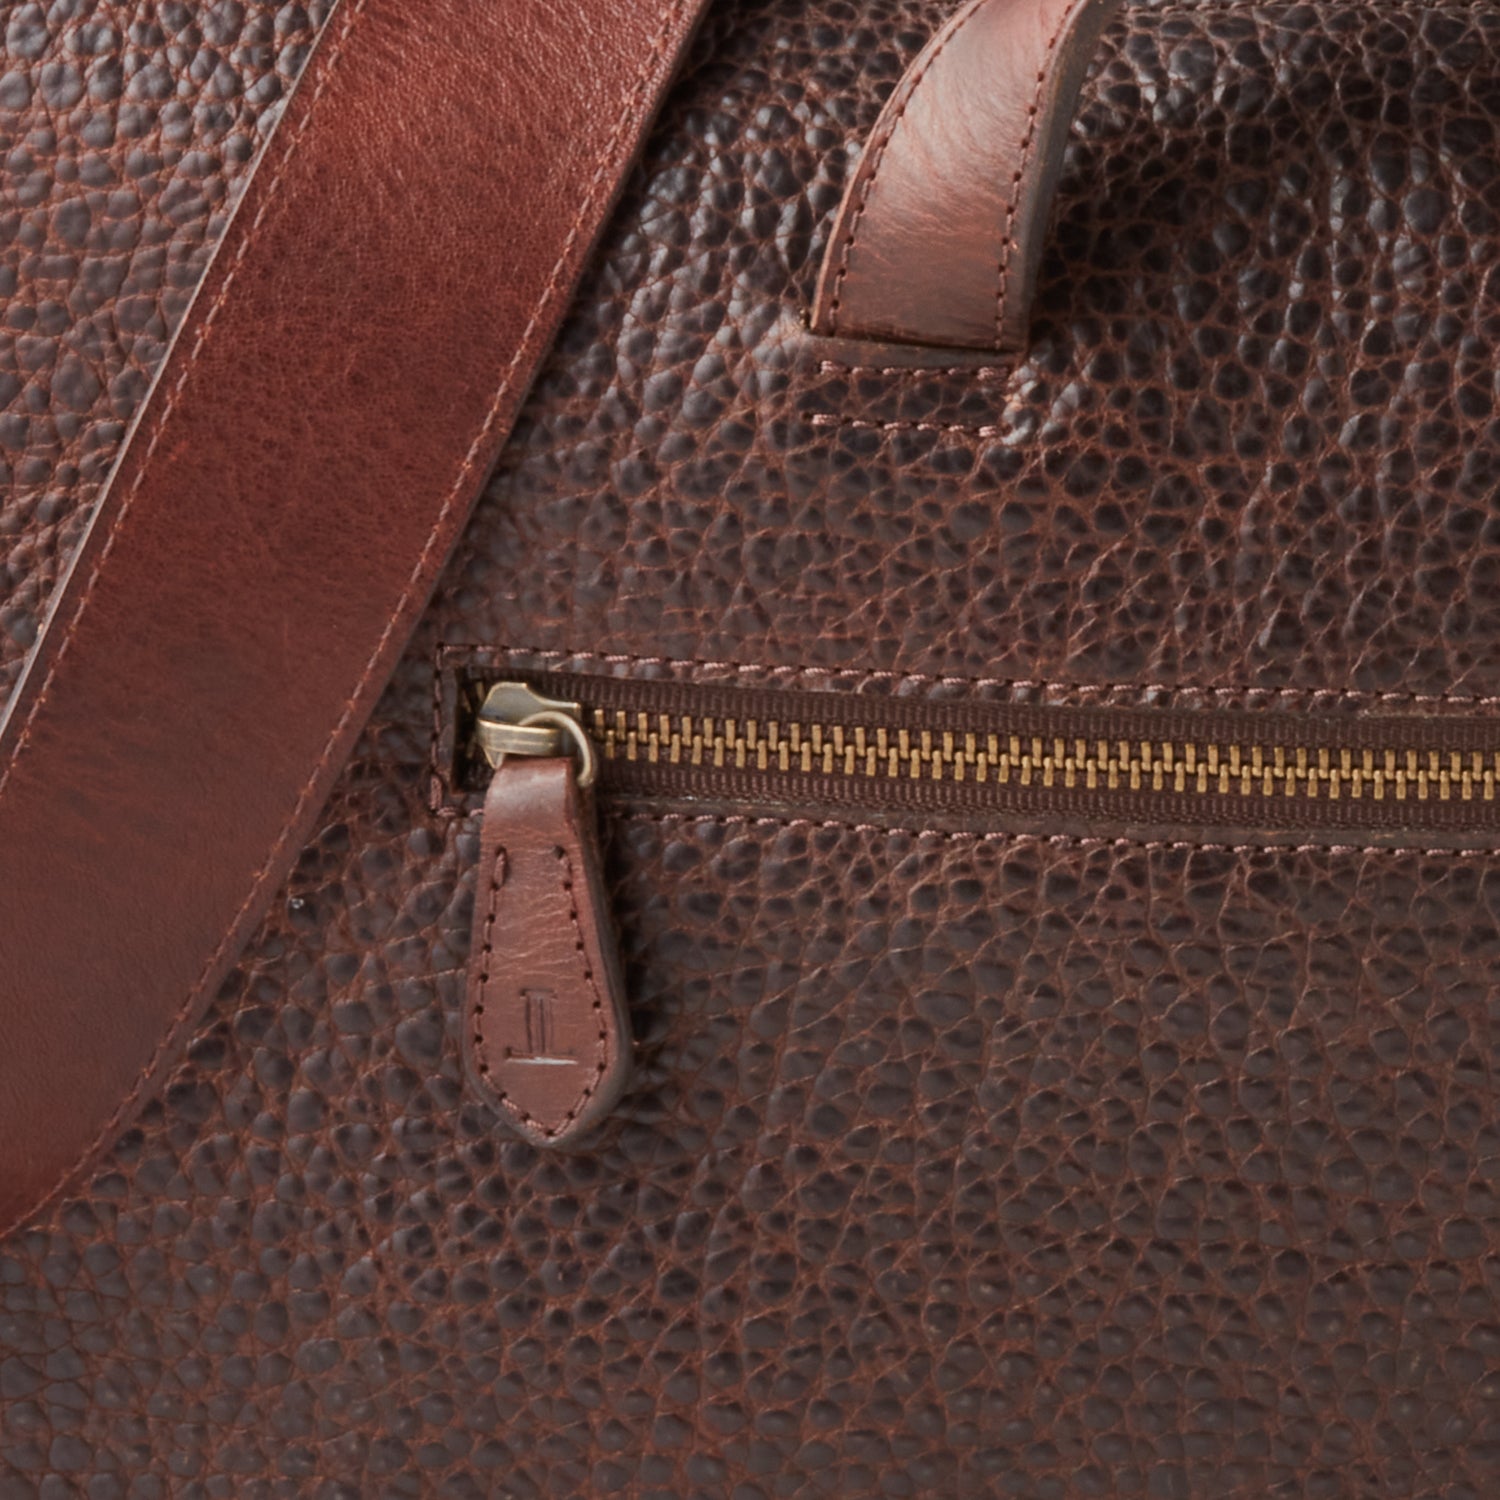 Shop All Travel and Bags - Lucchese